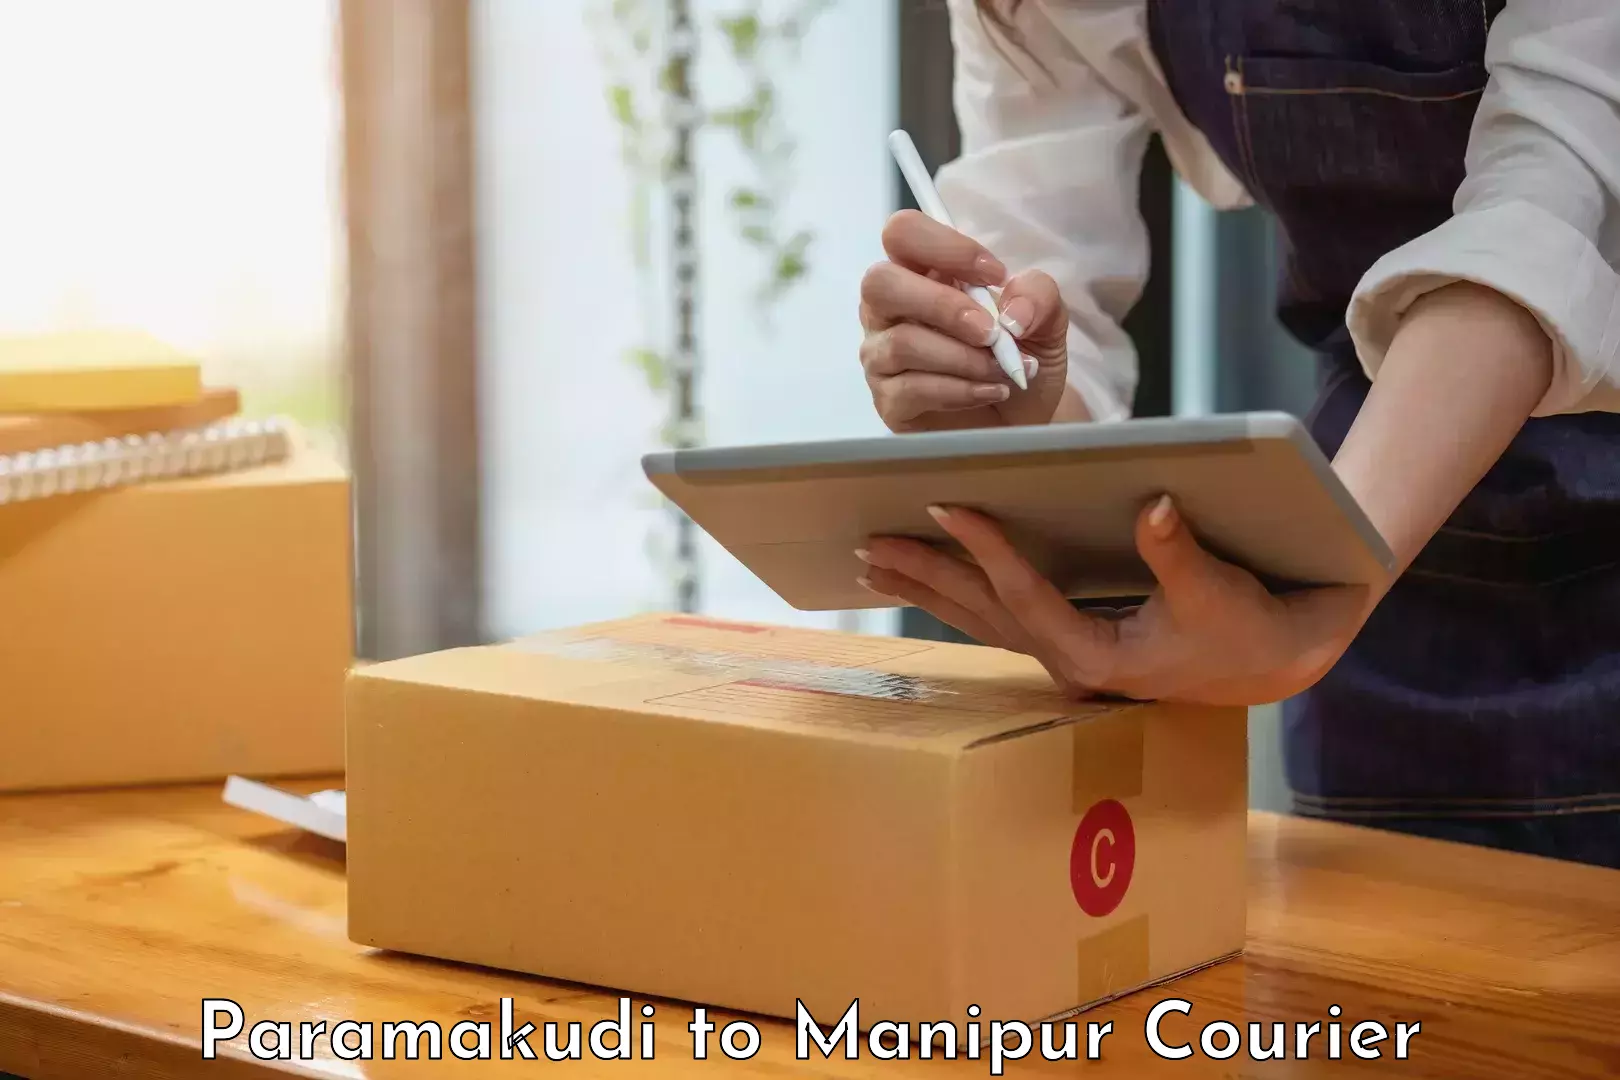 Cash on delivery service Paramakudi to Manipur